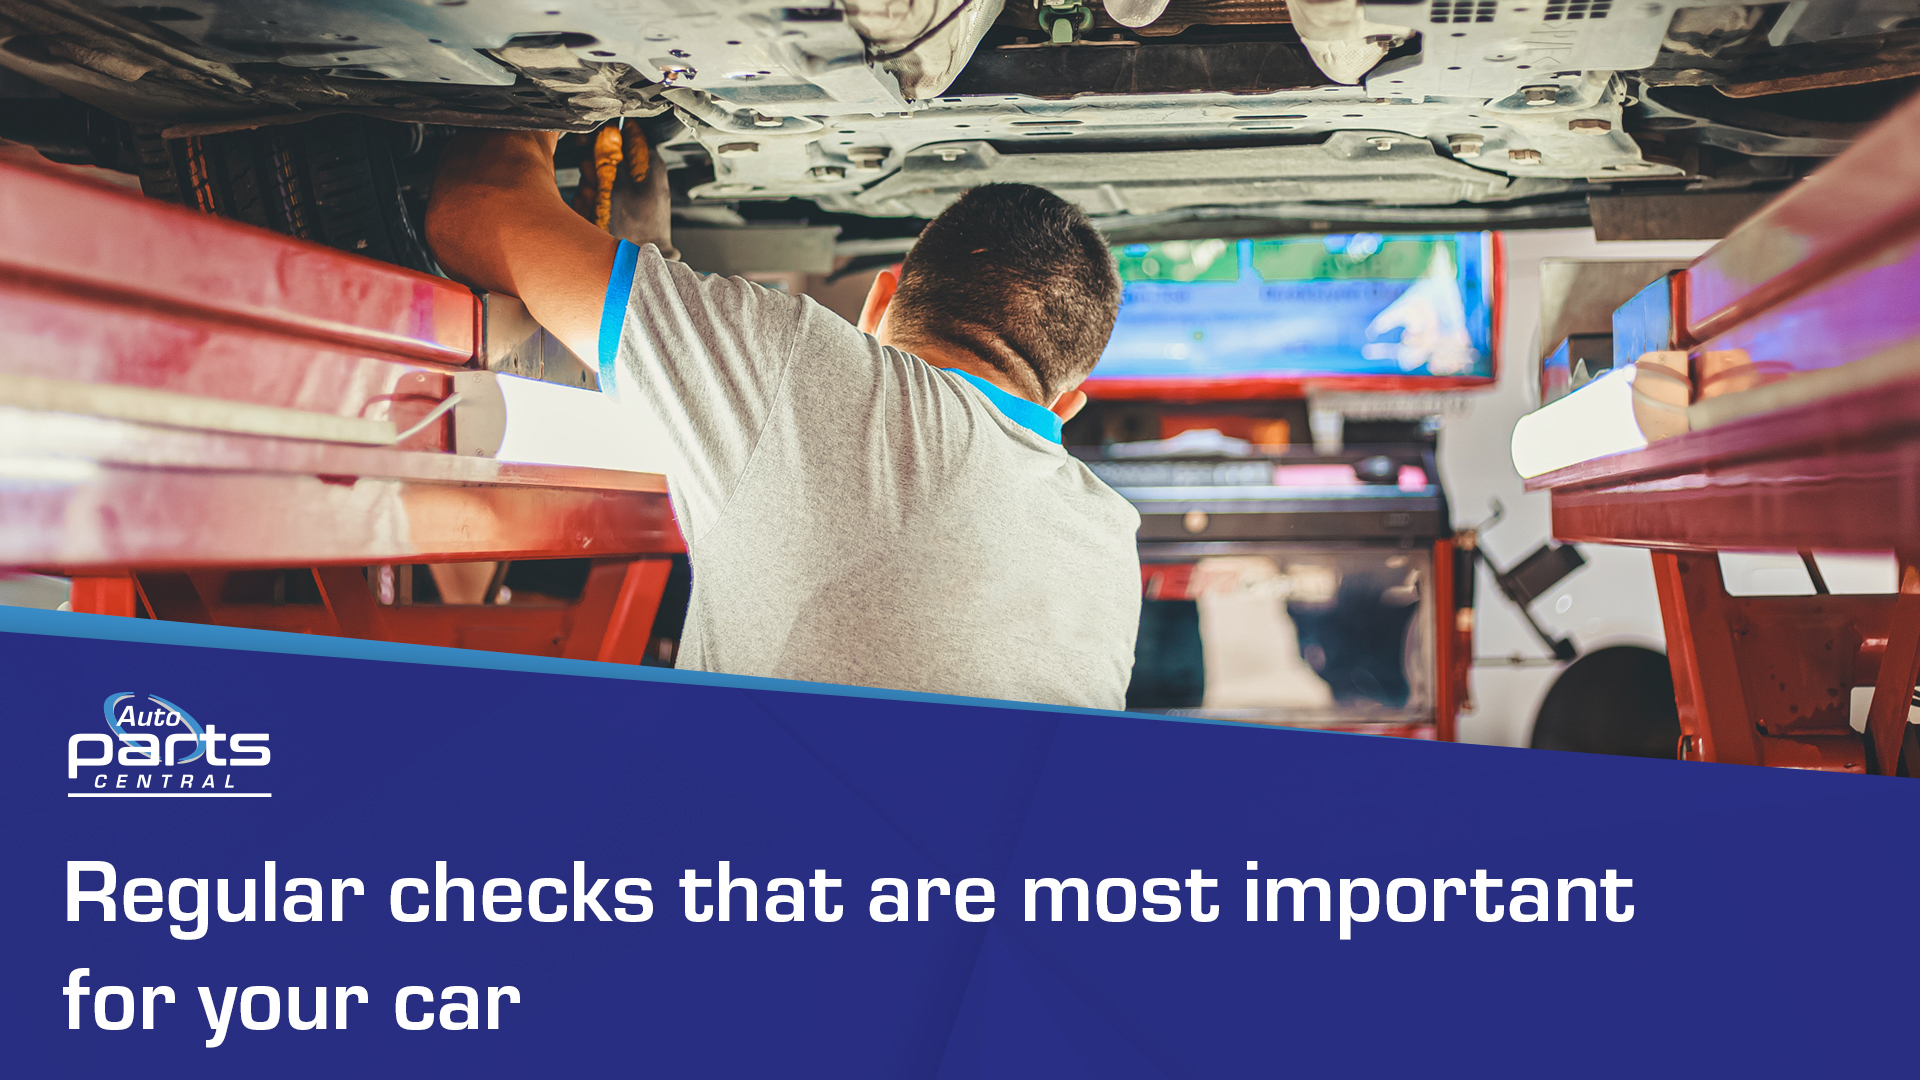 Regular checks that are most important for your car